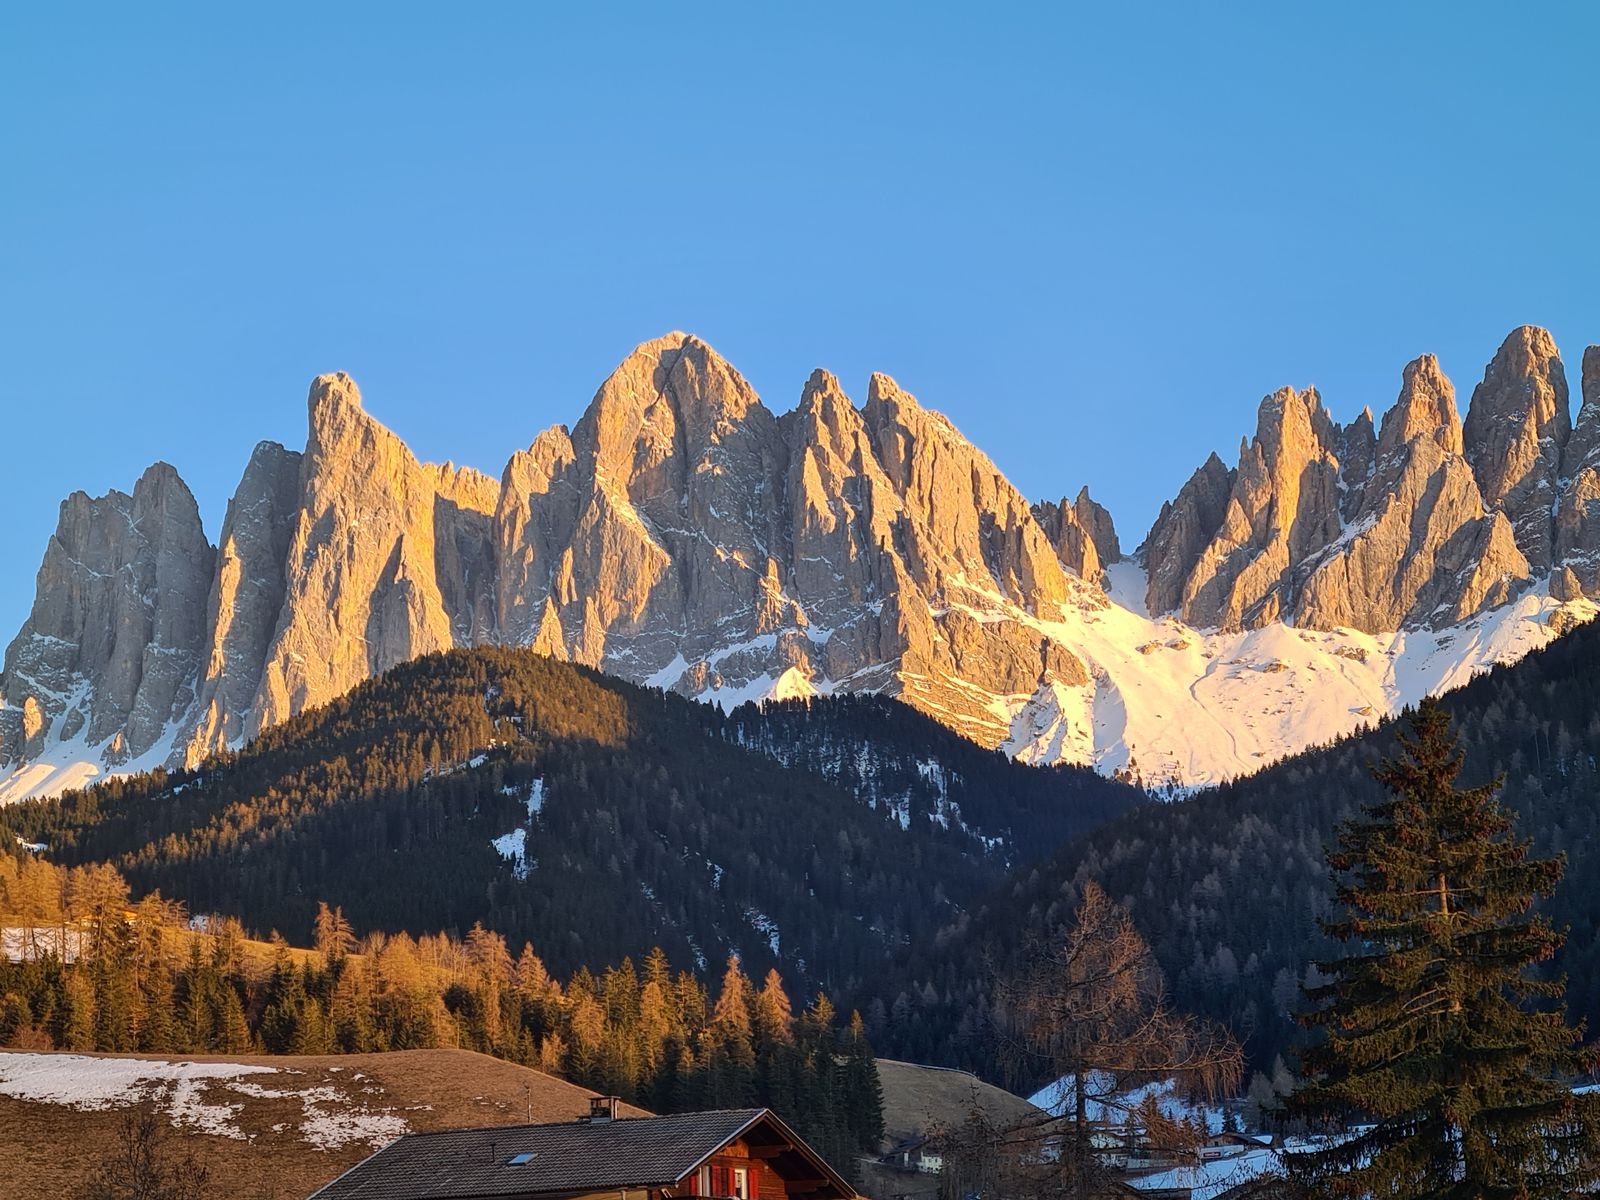 jagged mountains in the Italian dolomites, covered in snow and glowing orange at sunset